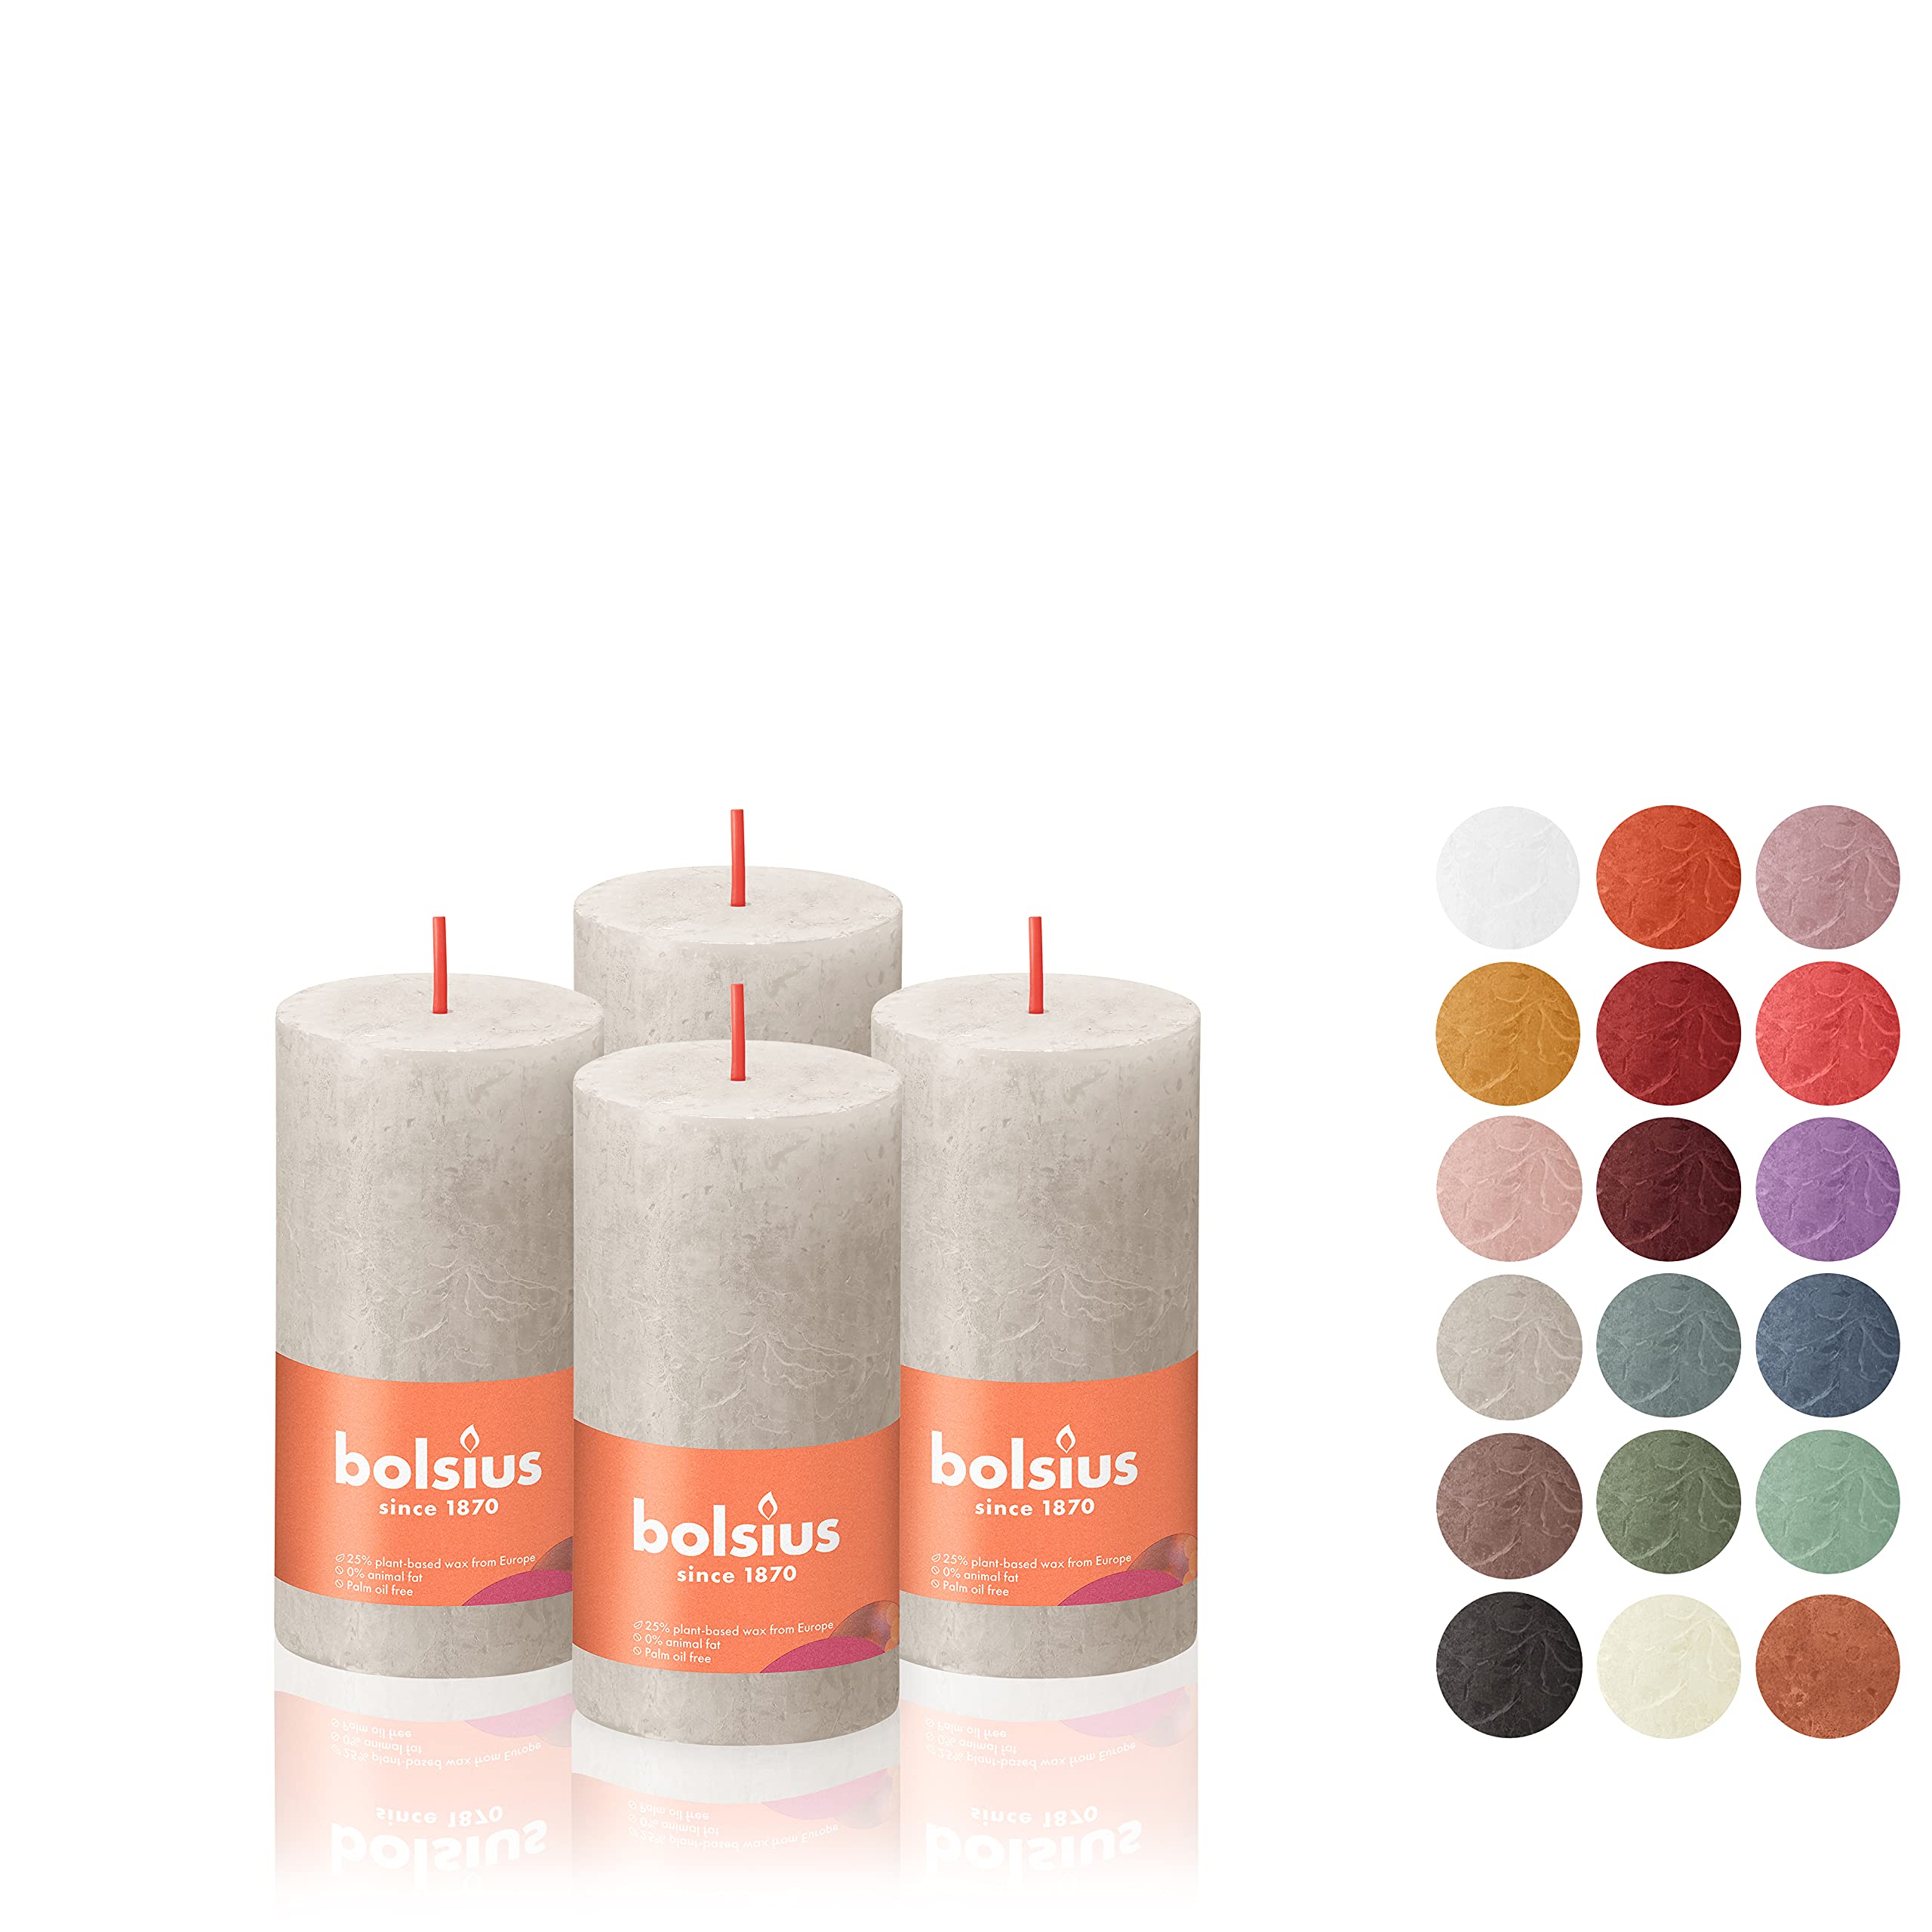 BOLSIUS 4 Pack Gray Rustic Pillar Candles - 2 X 4 Inches - Premium European Quality - Includes Natural Plant-Based Wax - Unscented Dripless Smokeless 30 Hour Party D�cor and Wedding Candles  - Like New